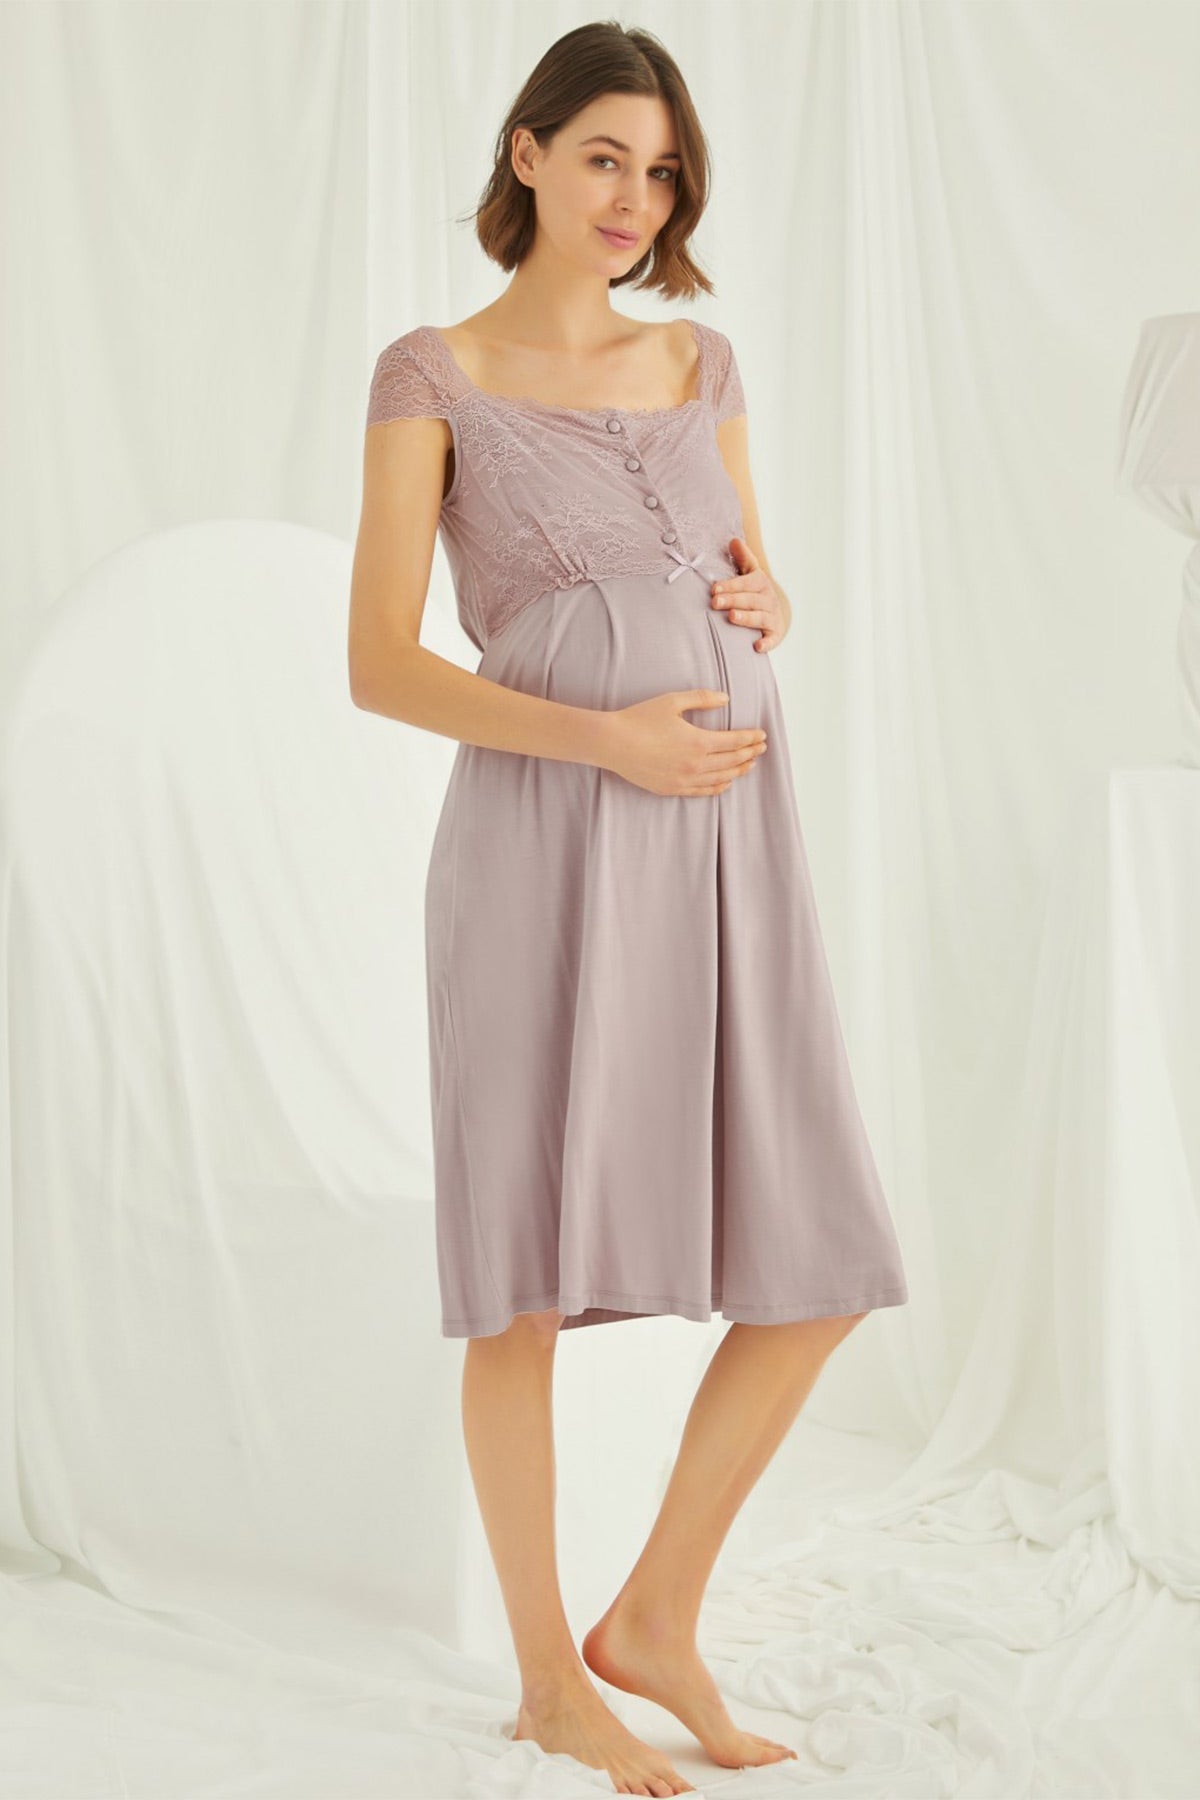 Shopymommy 18439 Lace Maternity & Nursing Nightgown Coffee